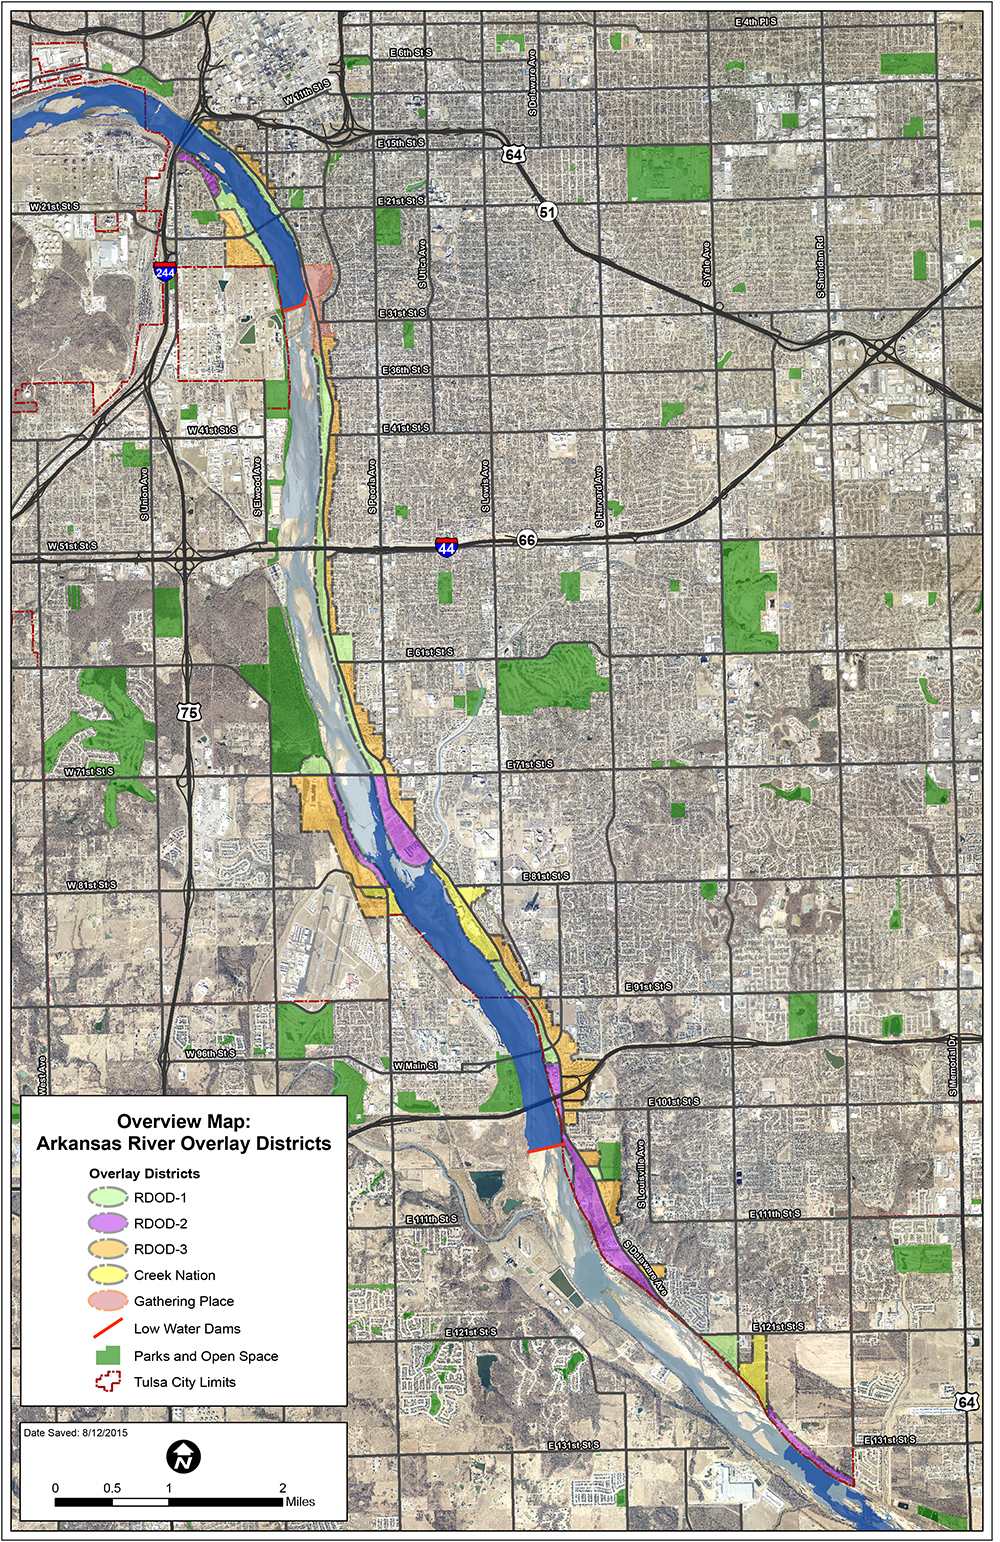 This preliminary map shows the areas covered by proposed Arkansas River development guidelines as designed ???? Provided.